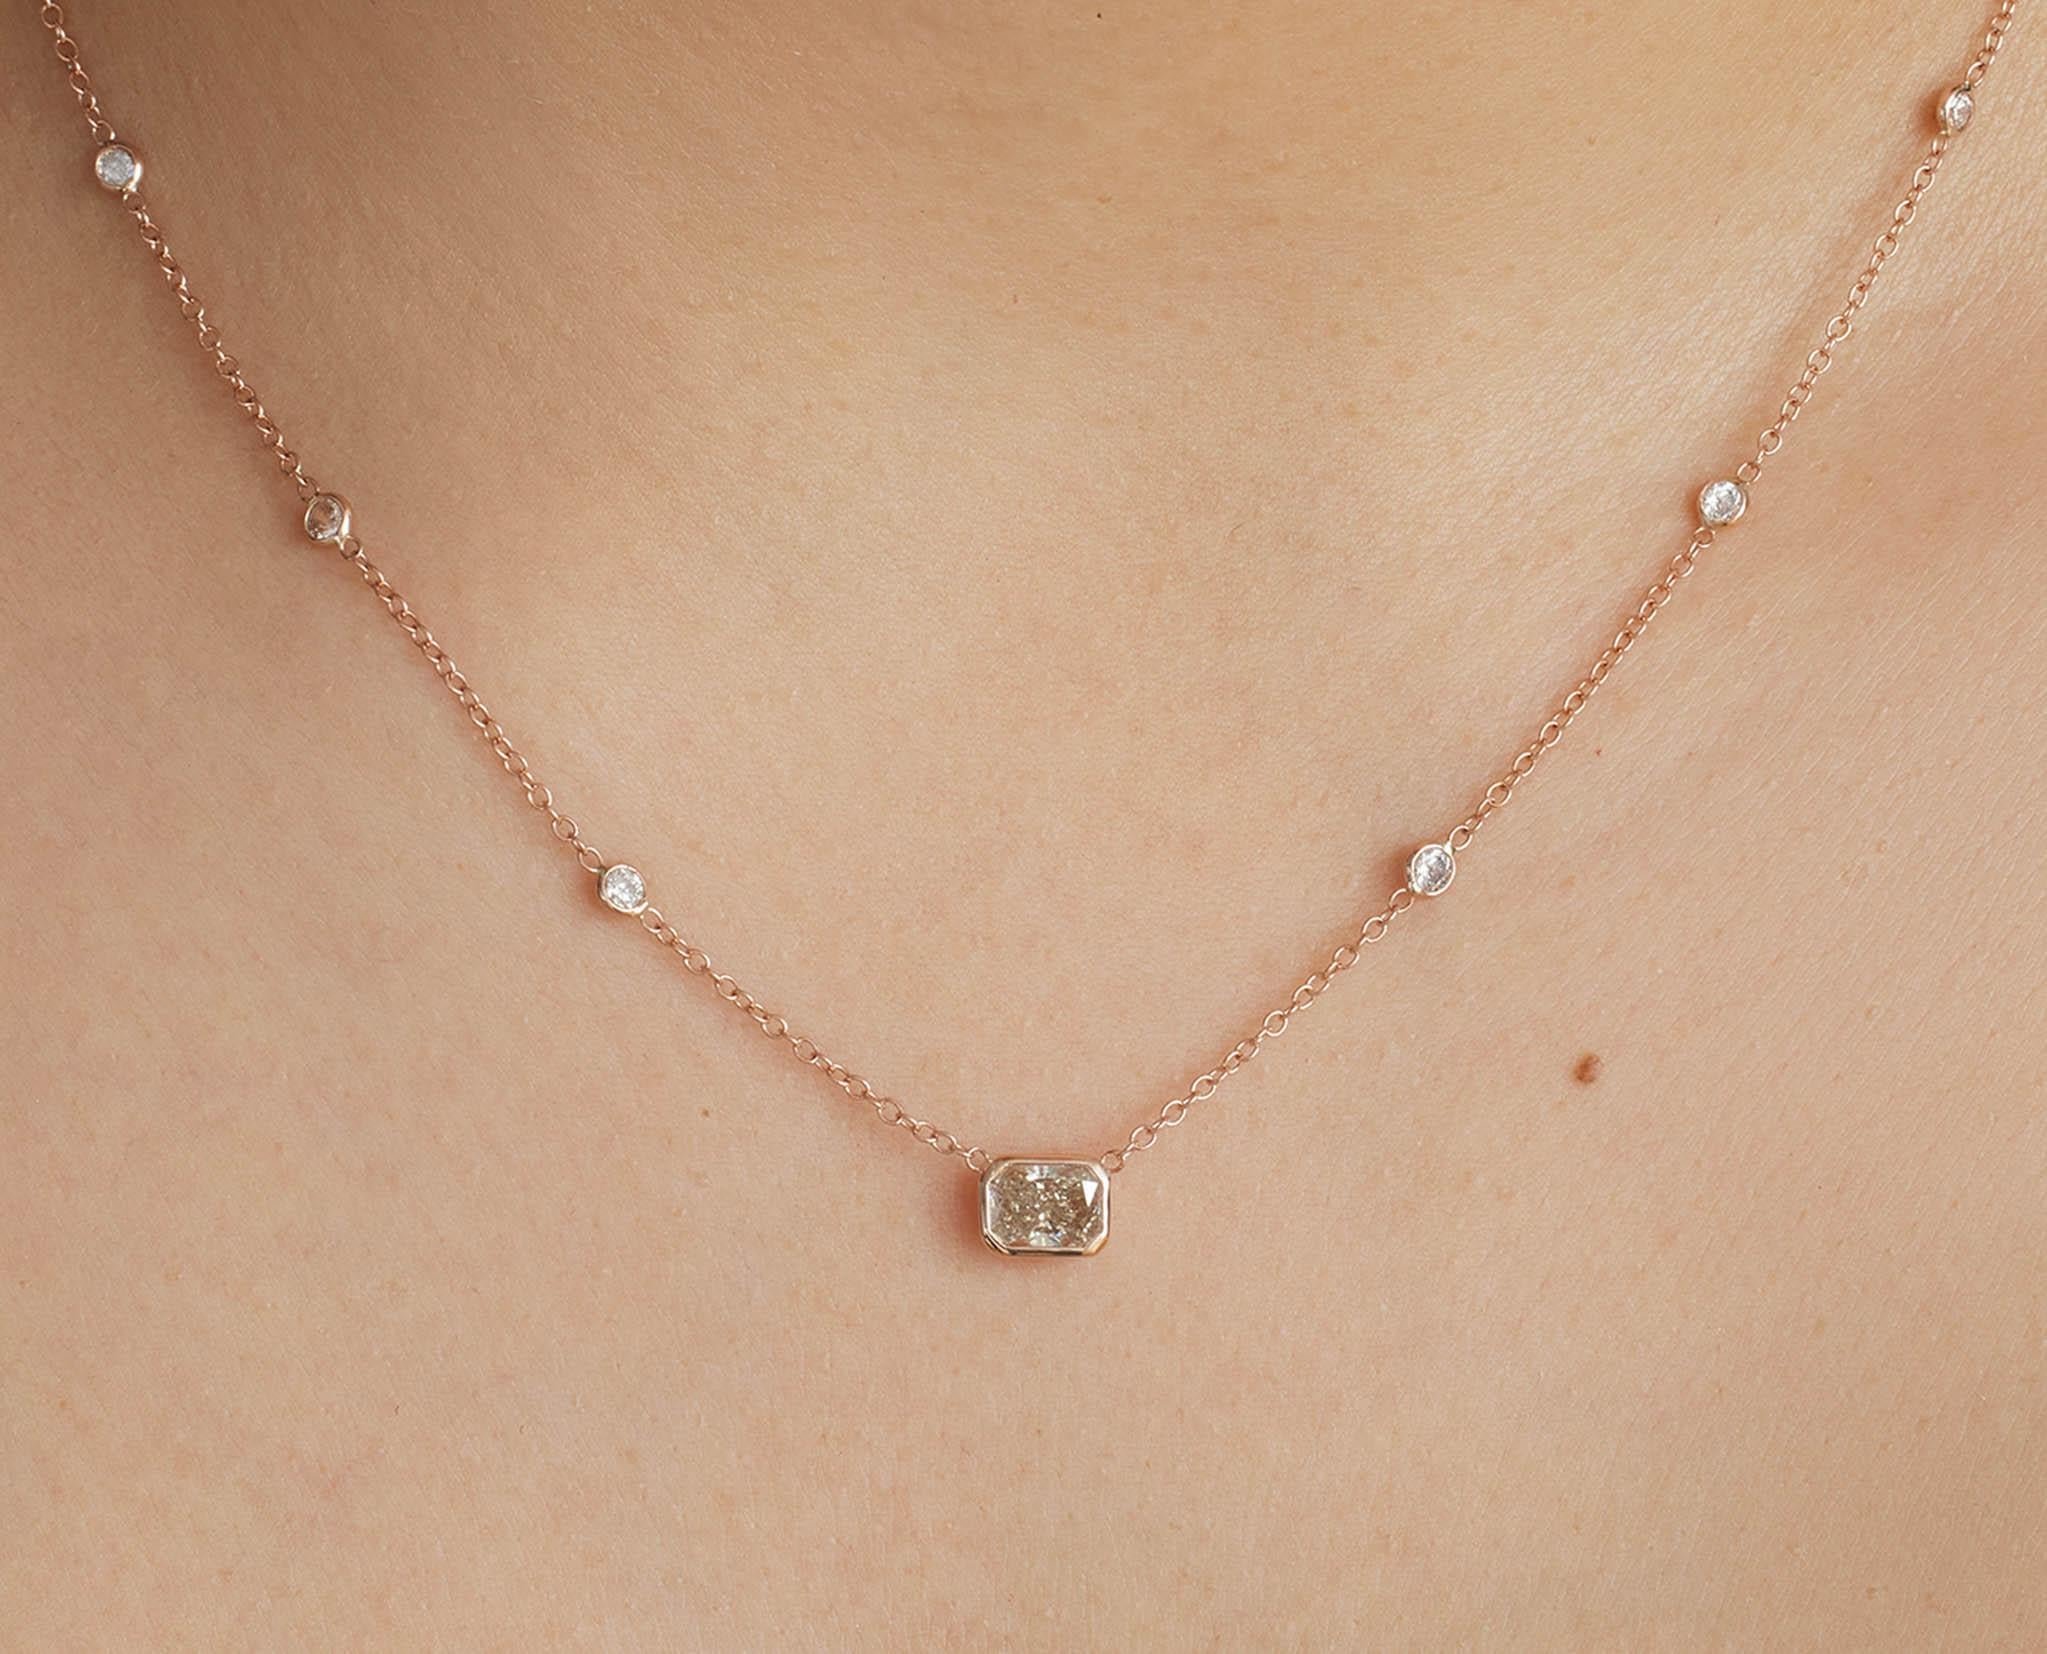 A wonderful Estate Diamond Pendant Necklace in 14k Rose Gold (tested). GIA Certified Center 0.91ct Radiant Diamond set into prong set in N, Very Light Brown color (color treated), I1 clarity. Very BRILLIANT, Warm Cognac color. The measurements are